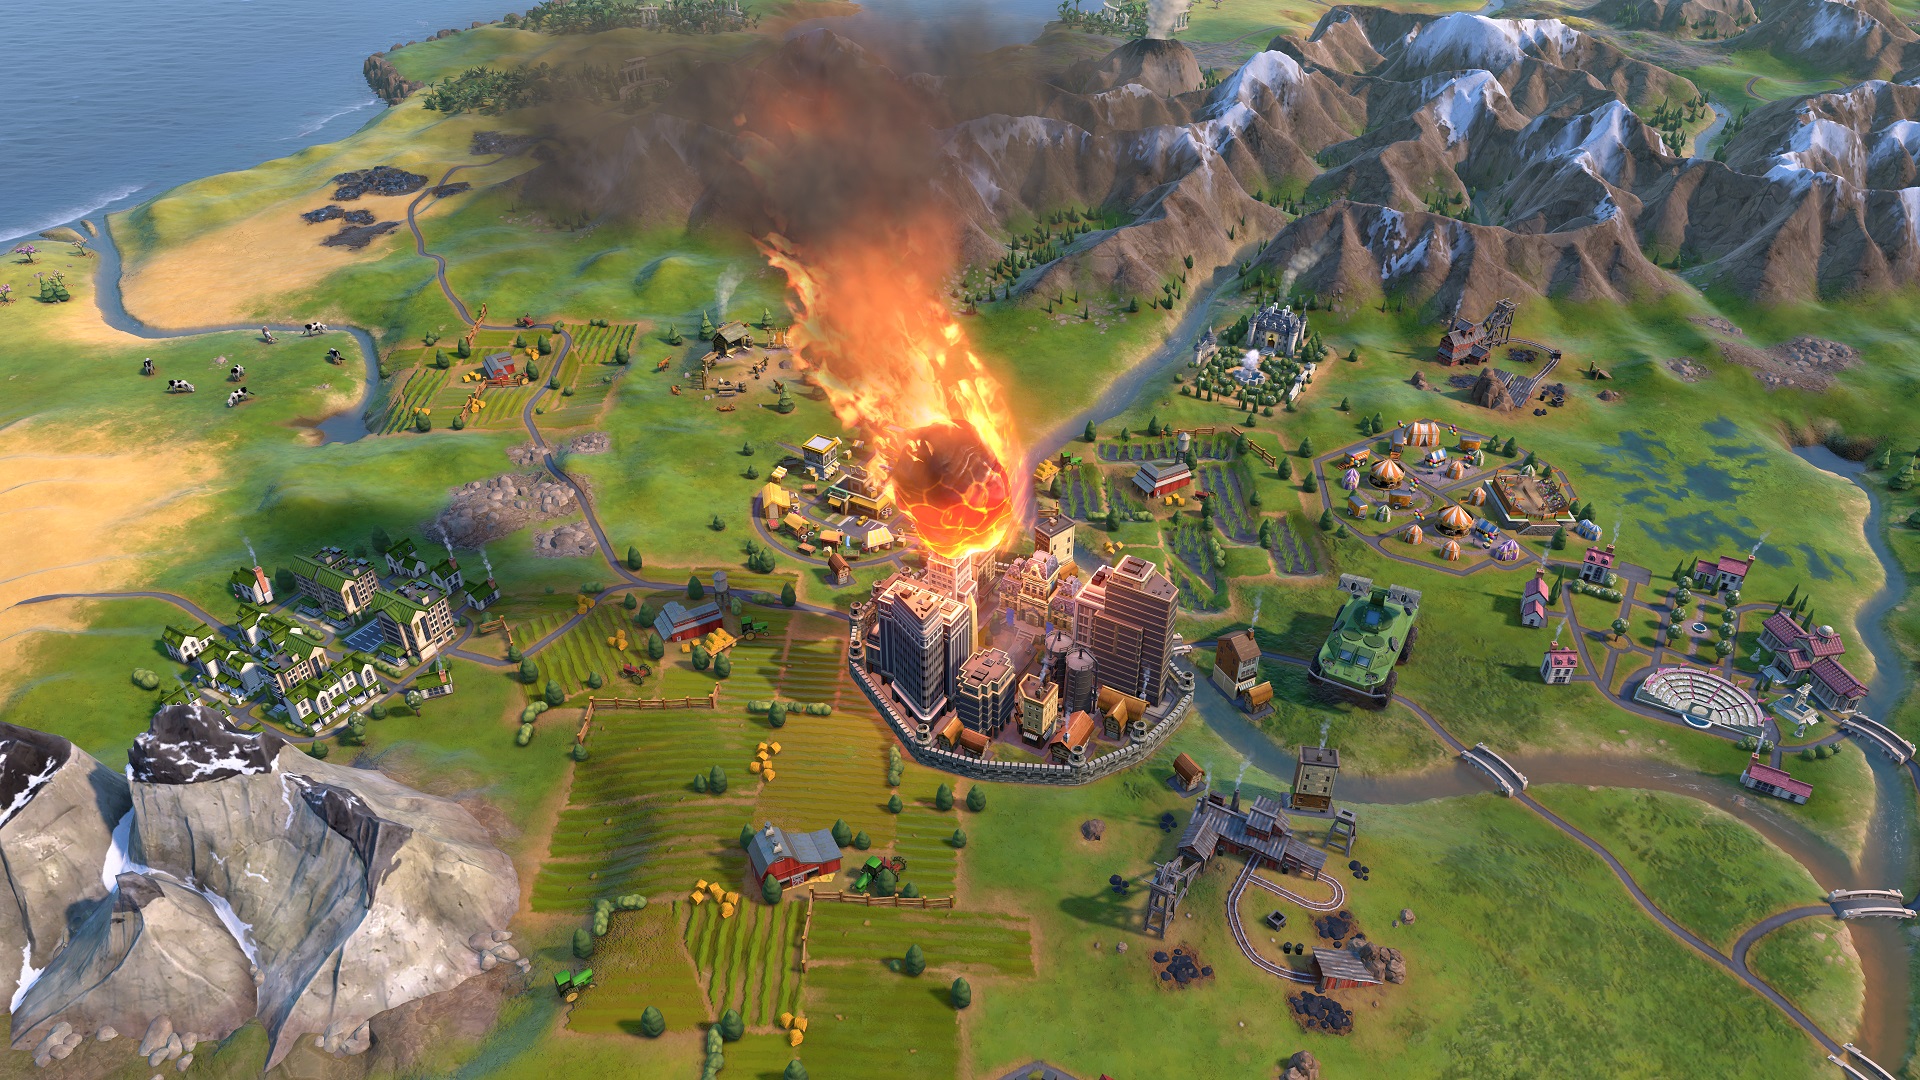 Best strategy games: a meteor is about to crash onto a city in Civilization 6.